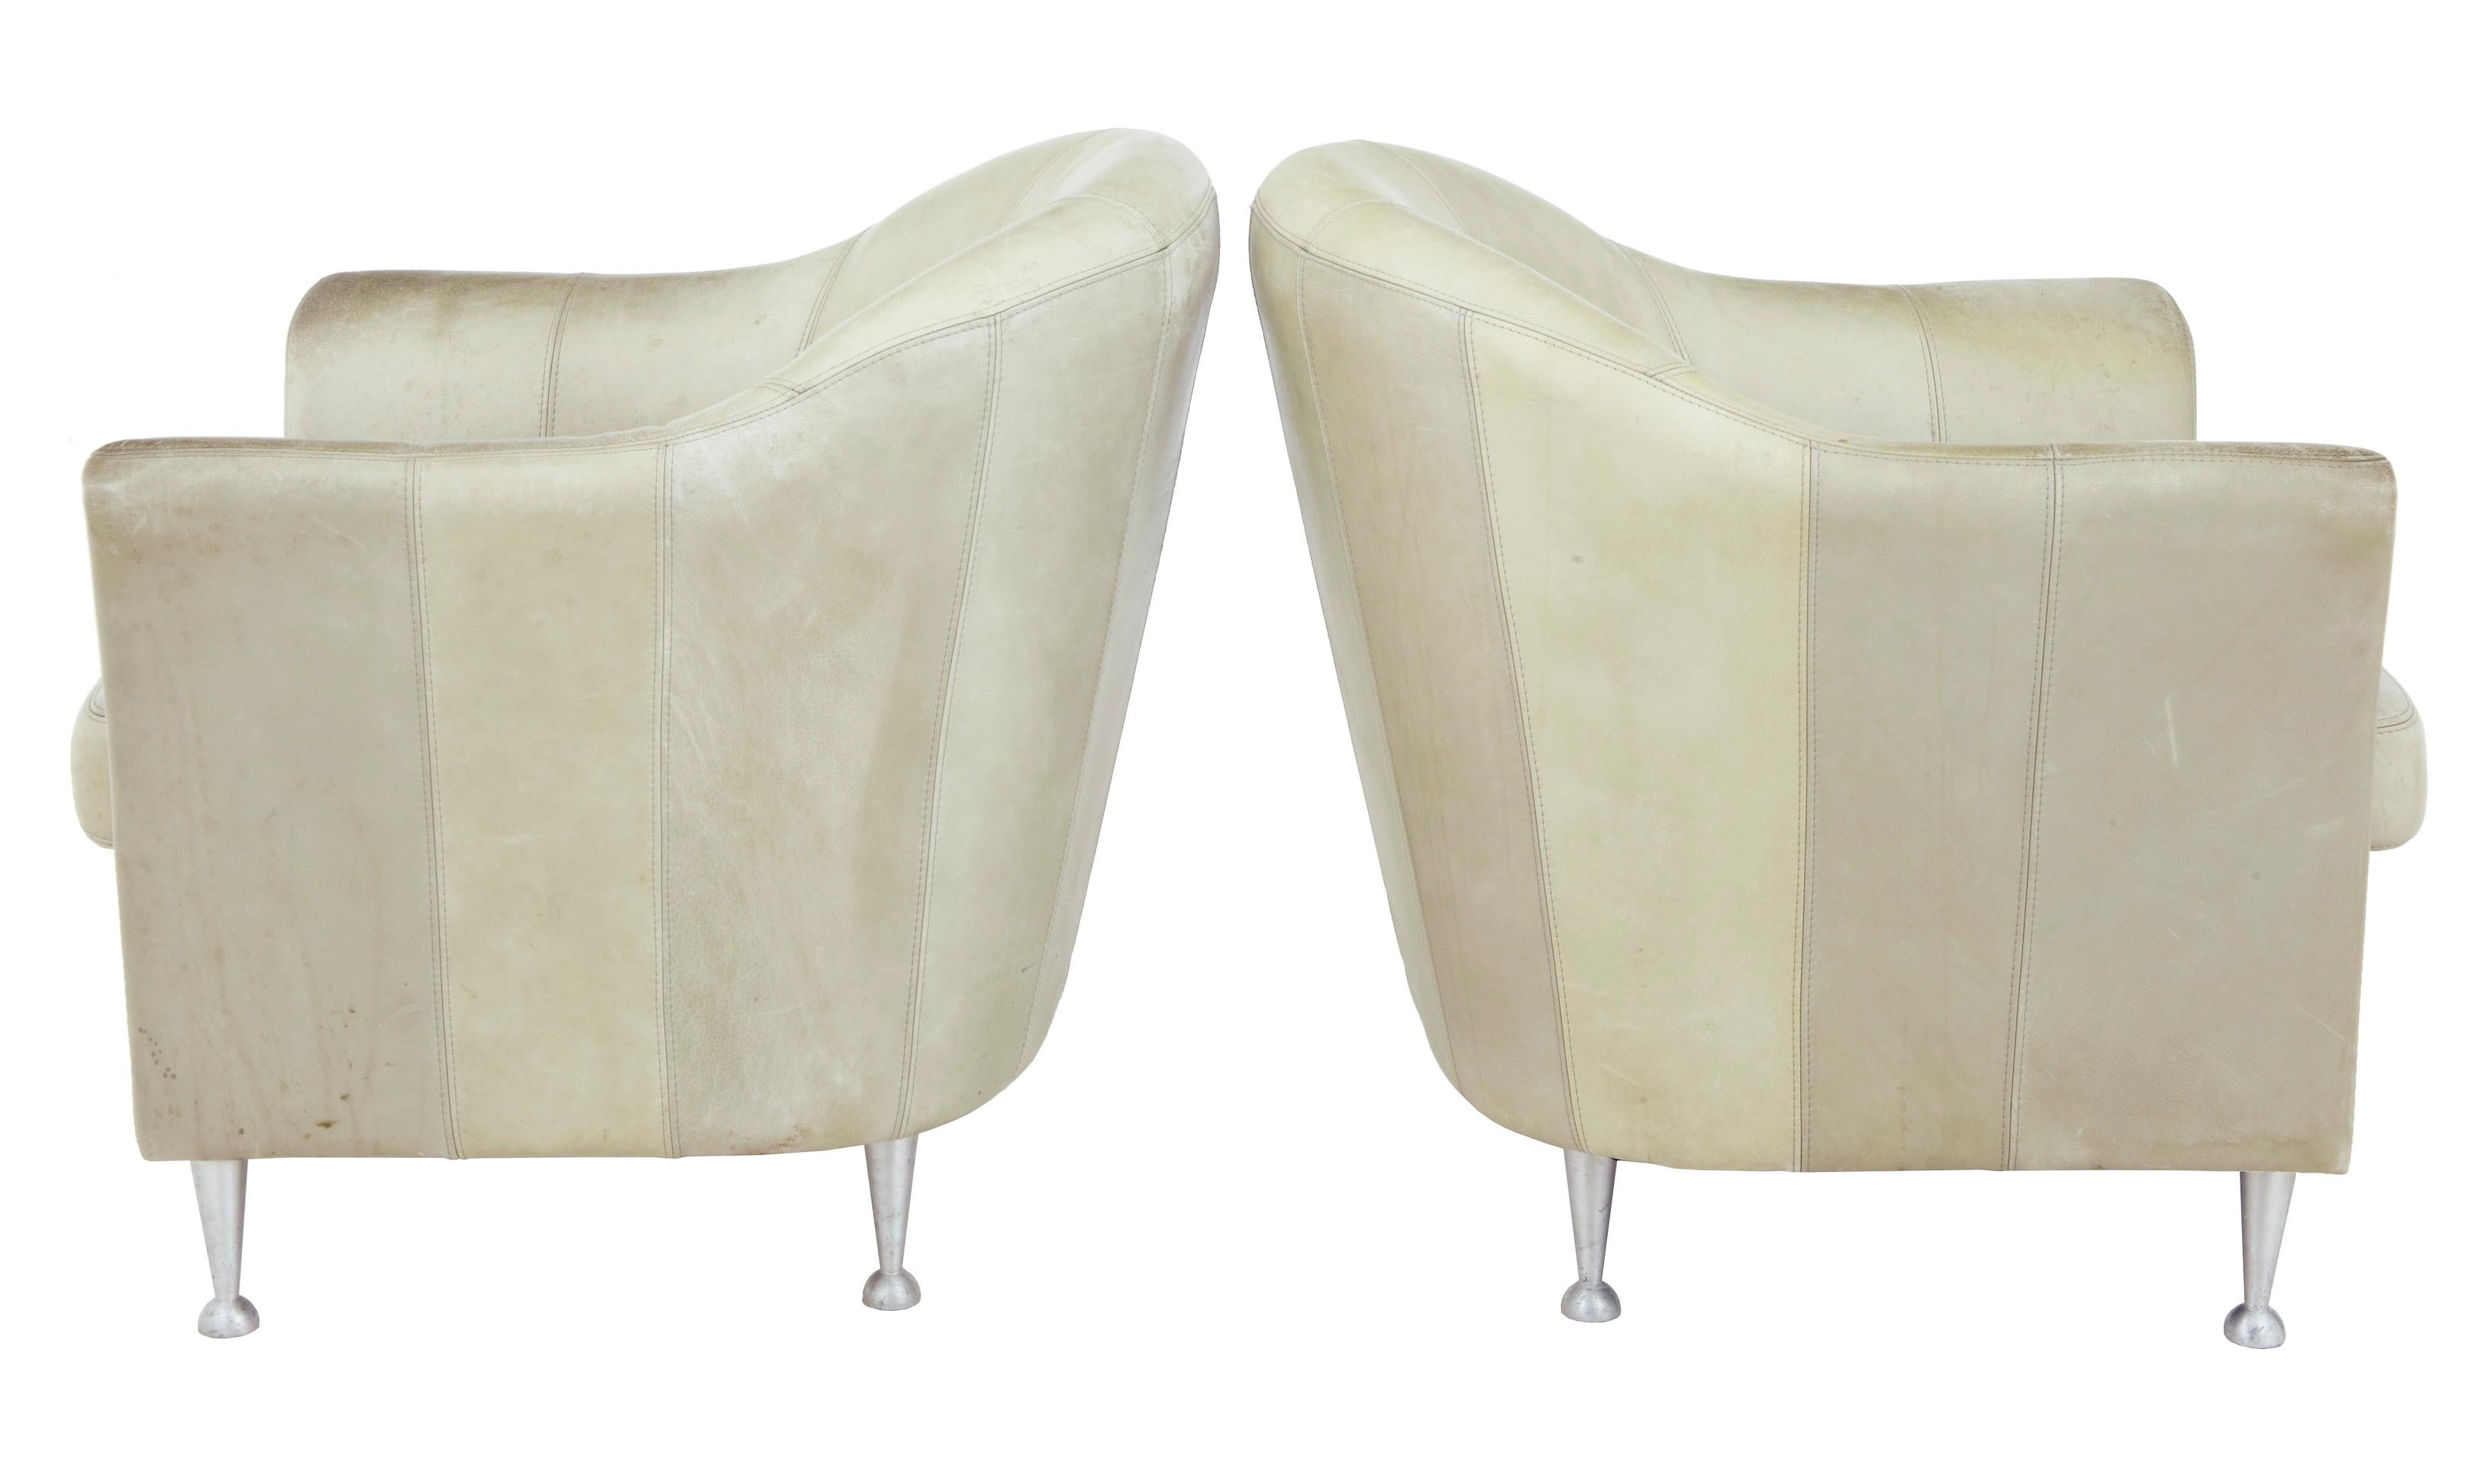 Pair of mid-20th century Scandinavian leather tub armchairs, circa 1960.

Very comfortable pair of lounge chairs. Wear and staining to leather but no holes. A deep clean and leather re-coloring would make these a fine pair of chairs. Standing on